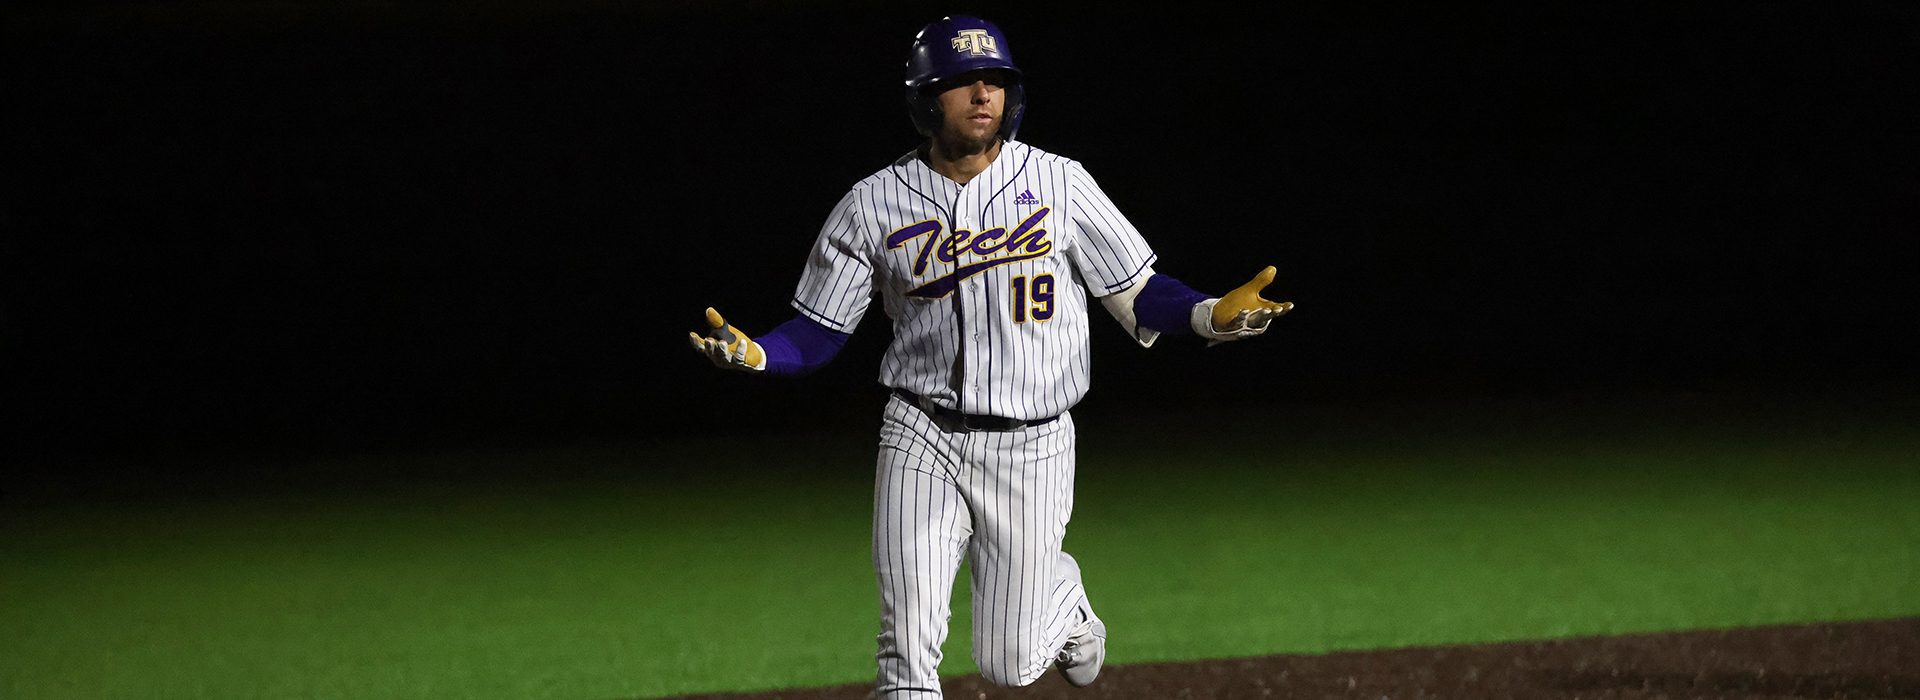 Tech baseball's Tuesday tilt with Middle Tennessee moved to Wednesday due to weather